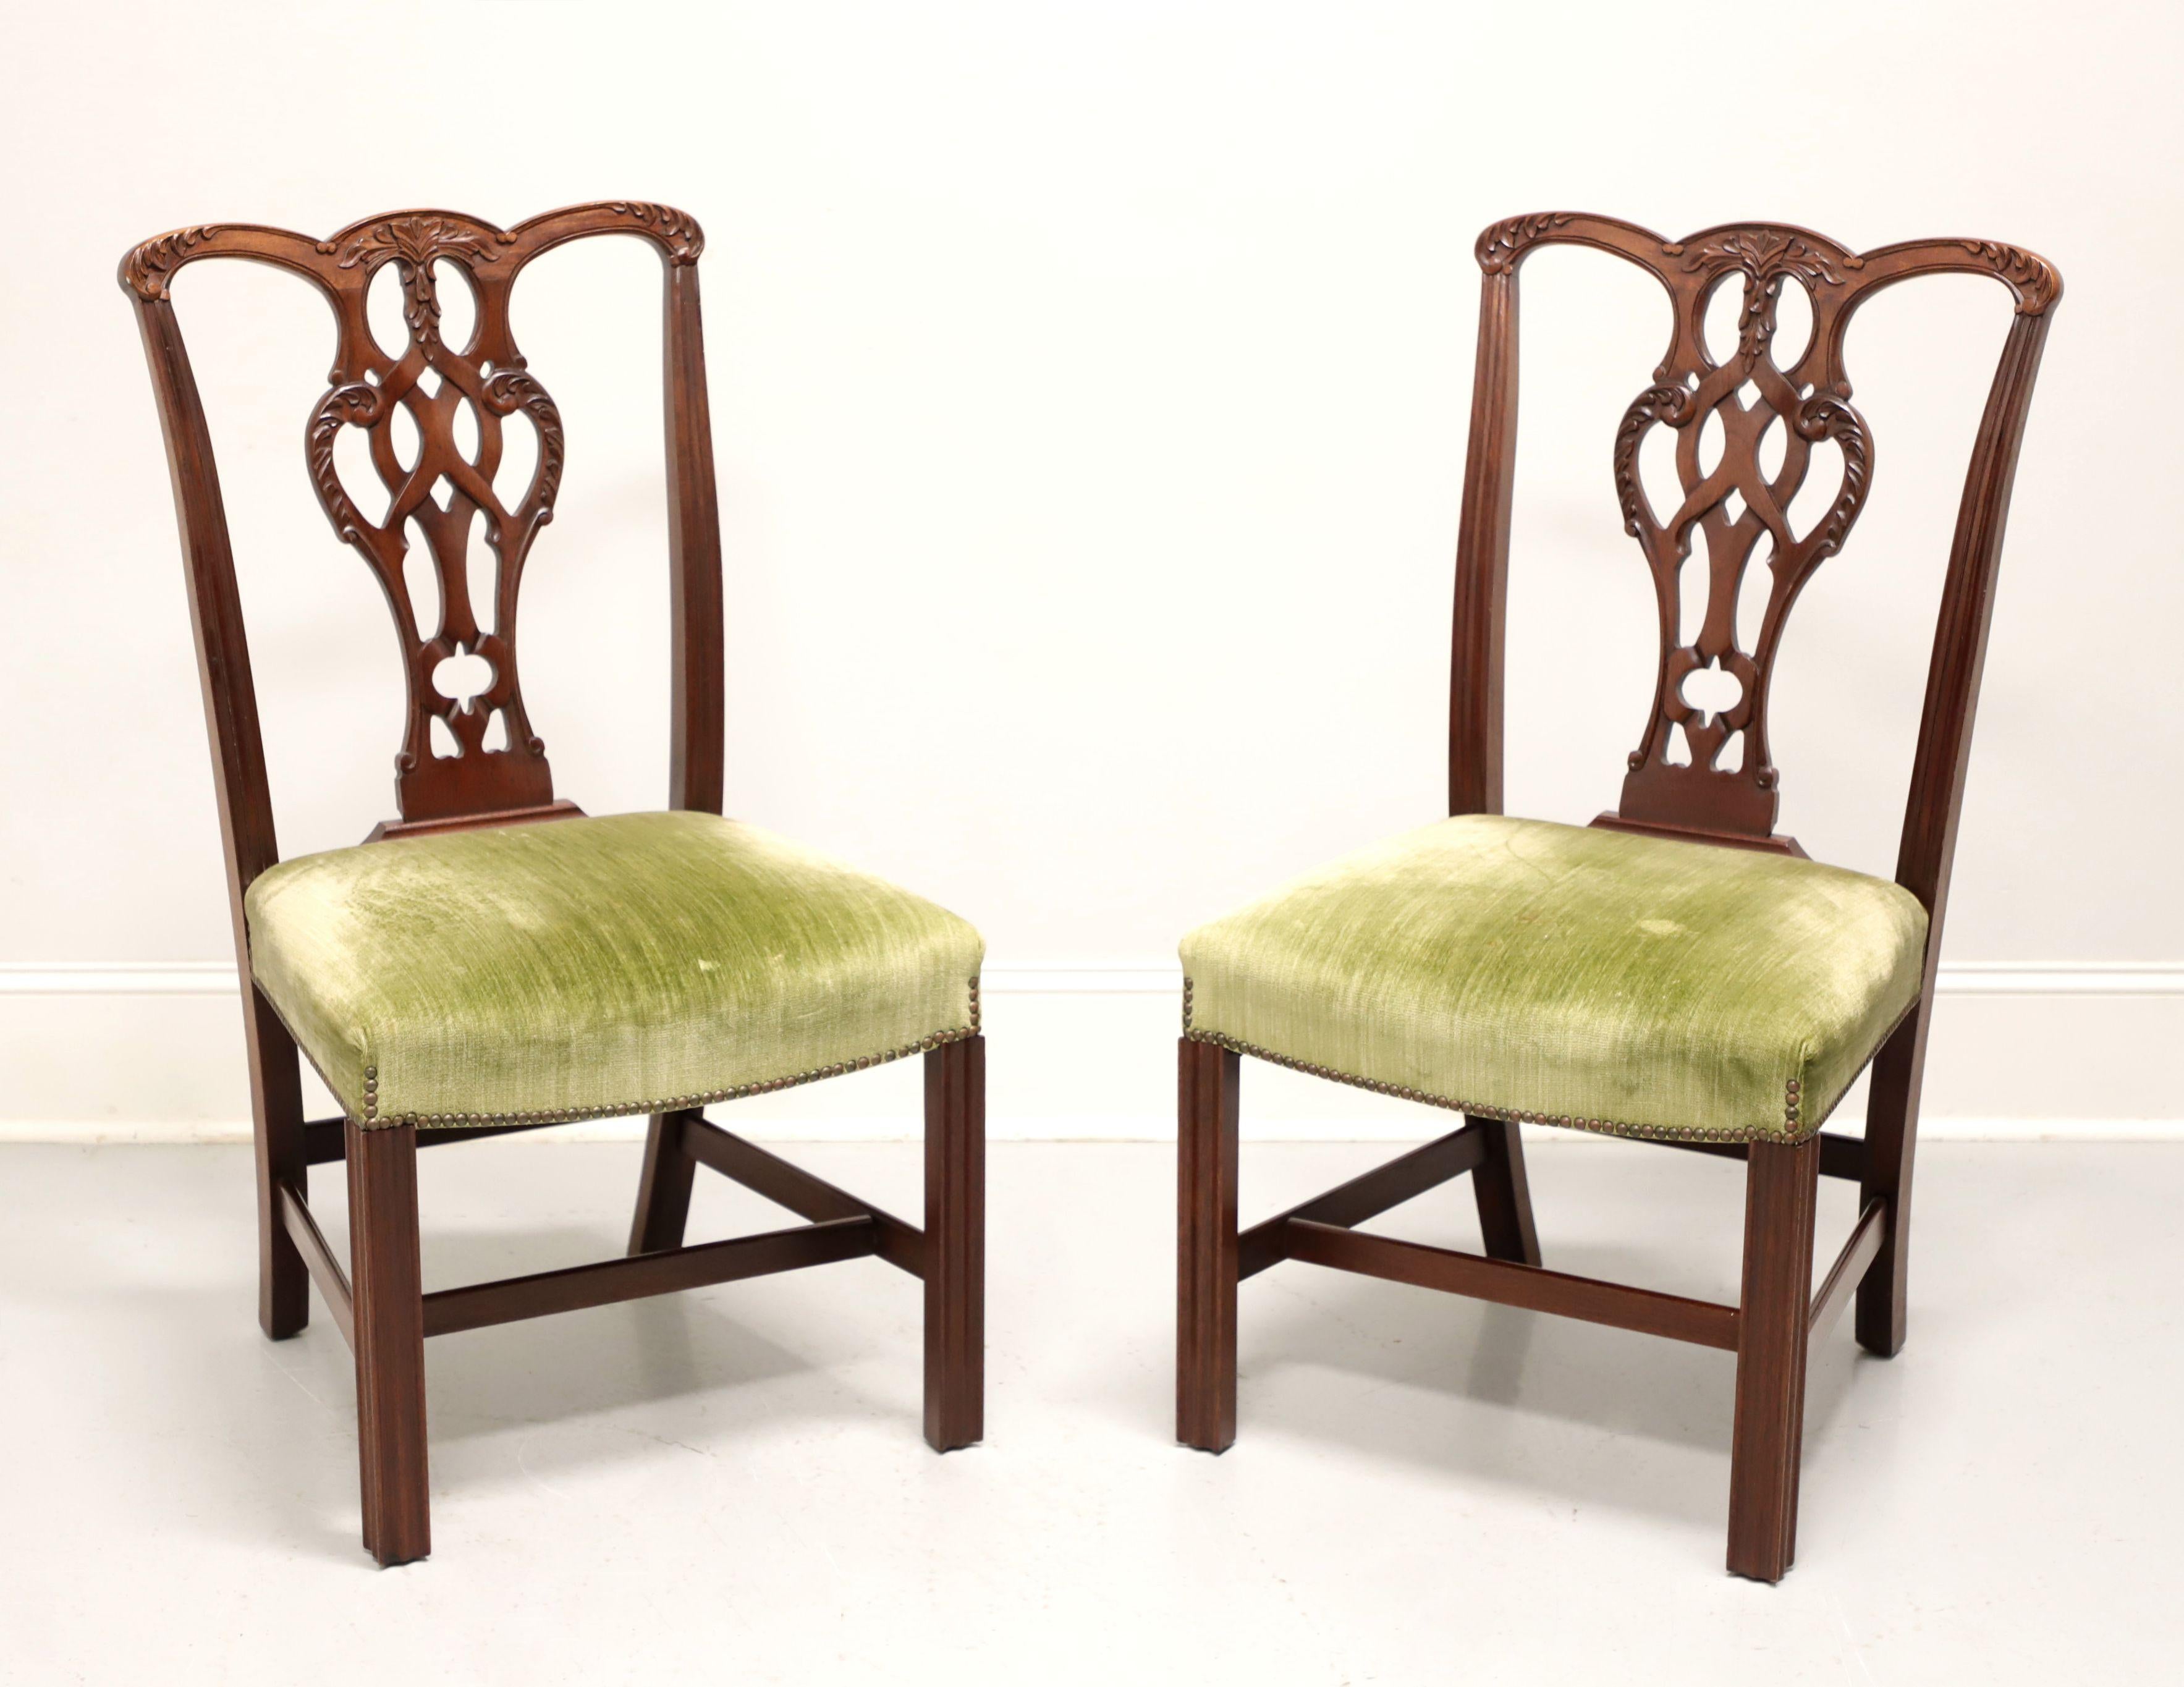 CRAFTIQUE Mahogany Chippendale Style Straight Leg Dining Side Chairs - Pair A 4